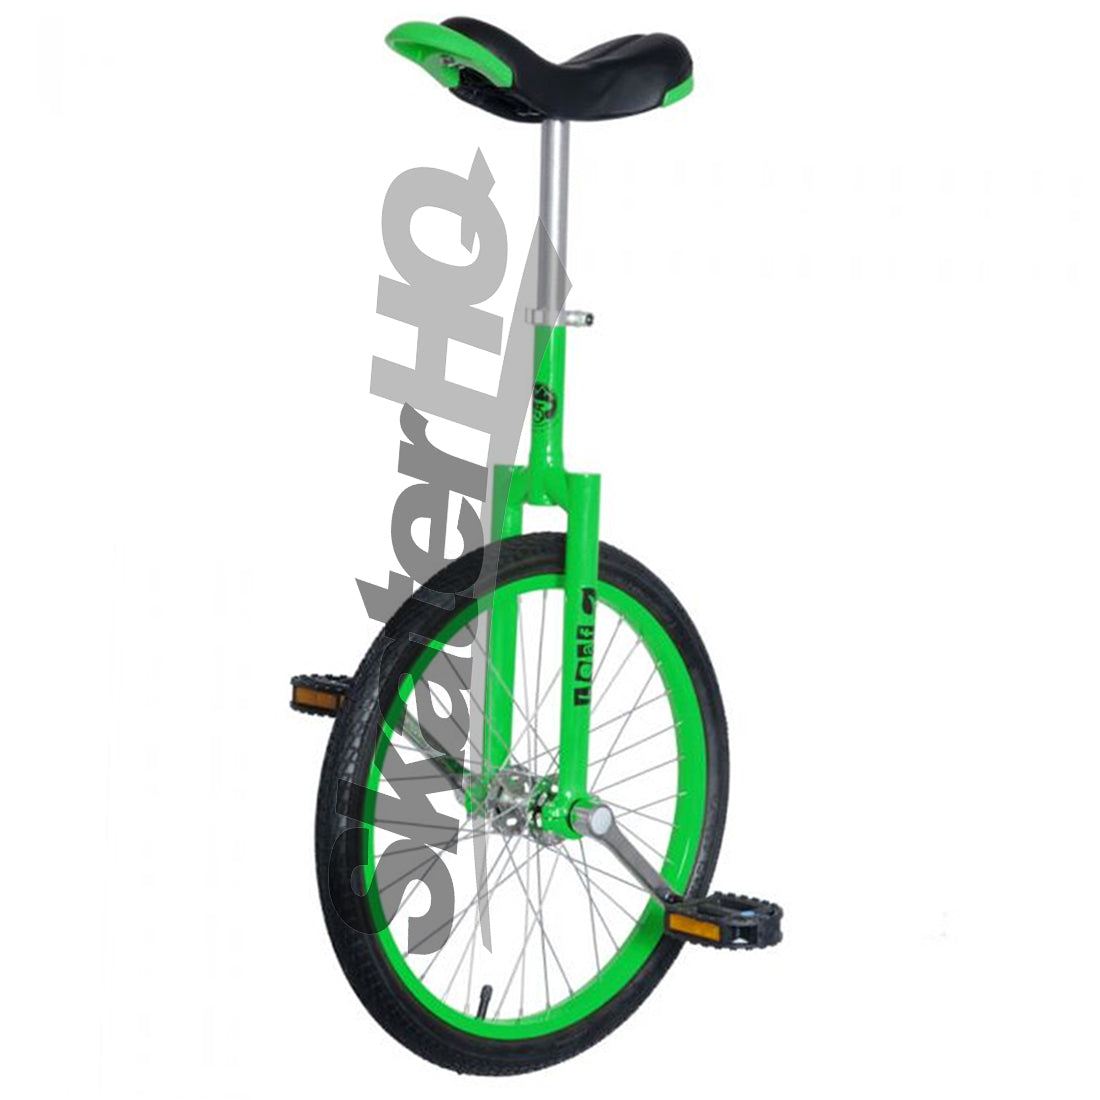 Leaf 20inch Unicycle - Green Other Fun Toys